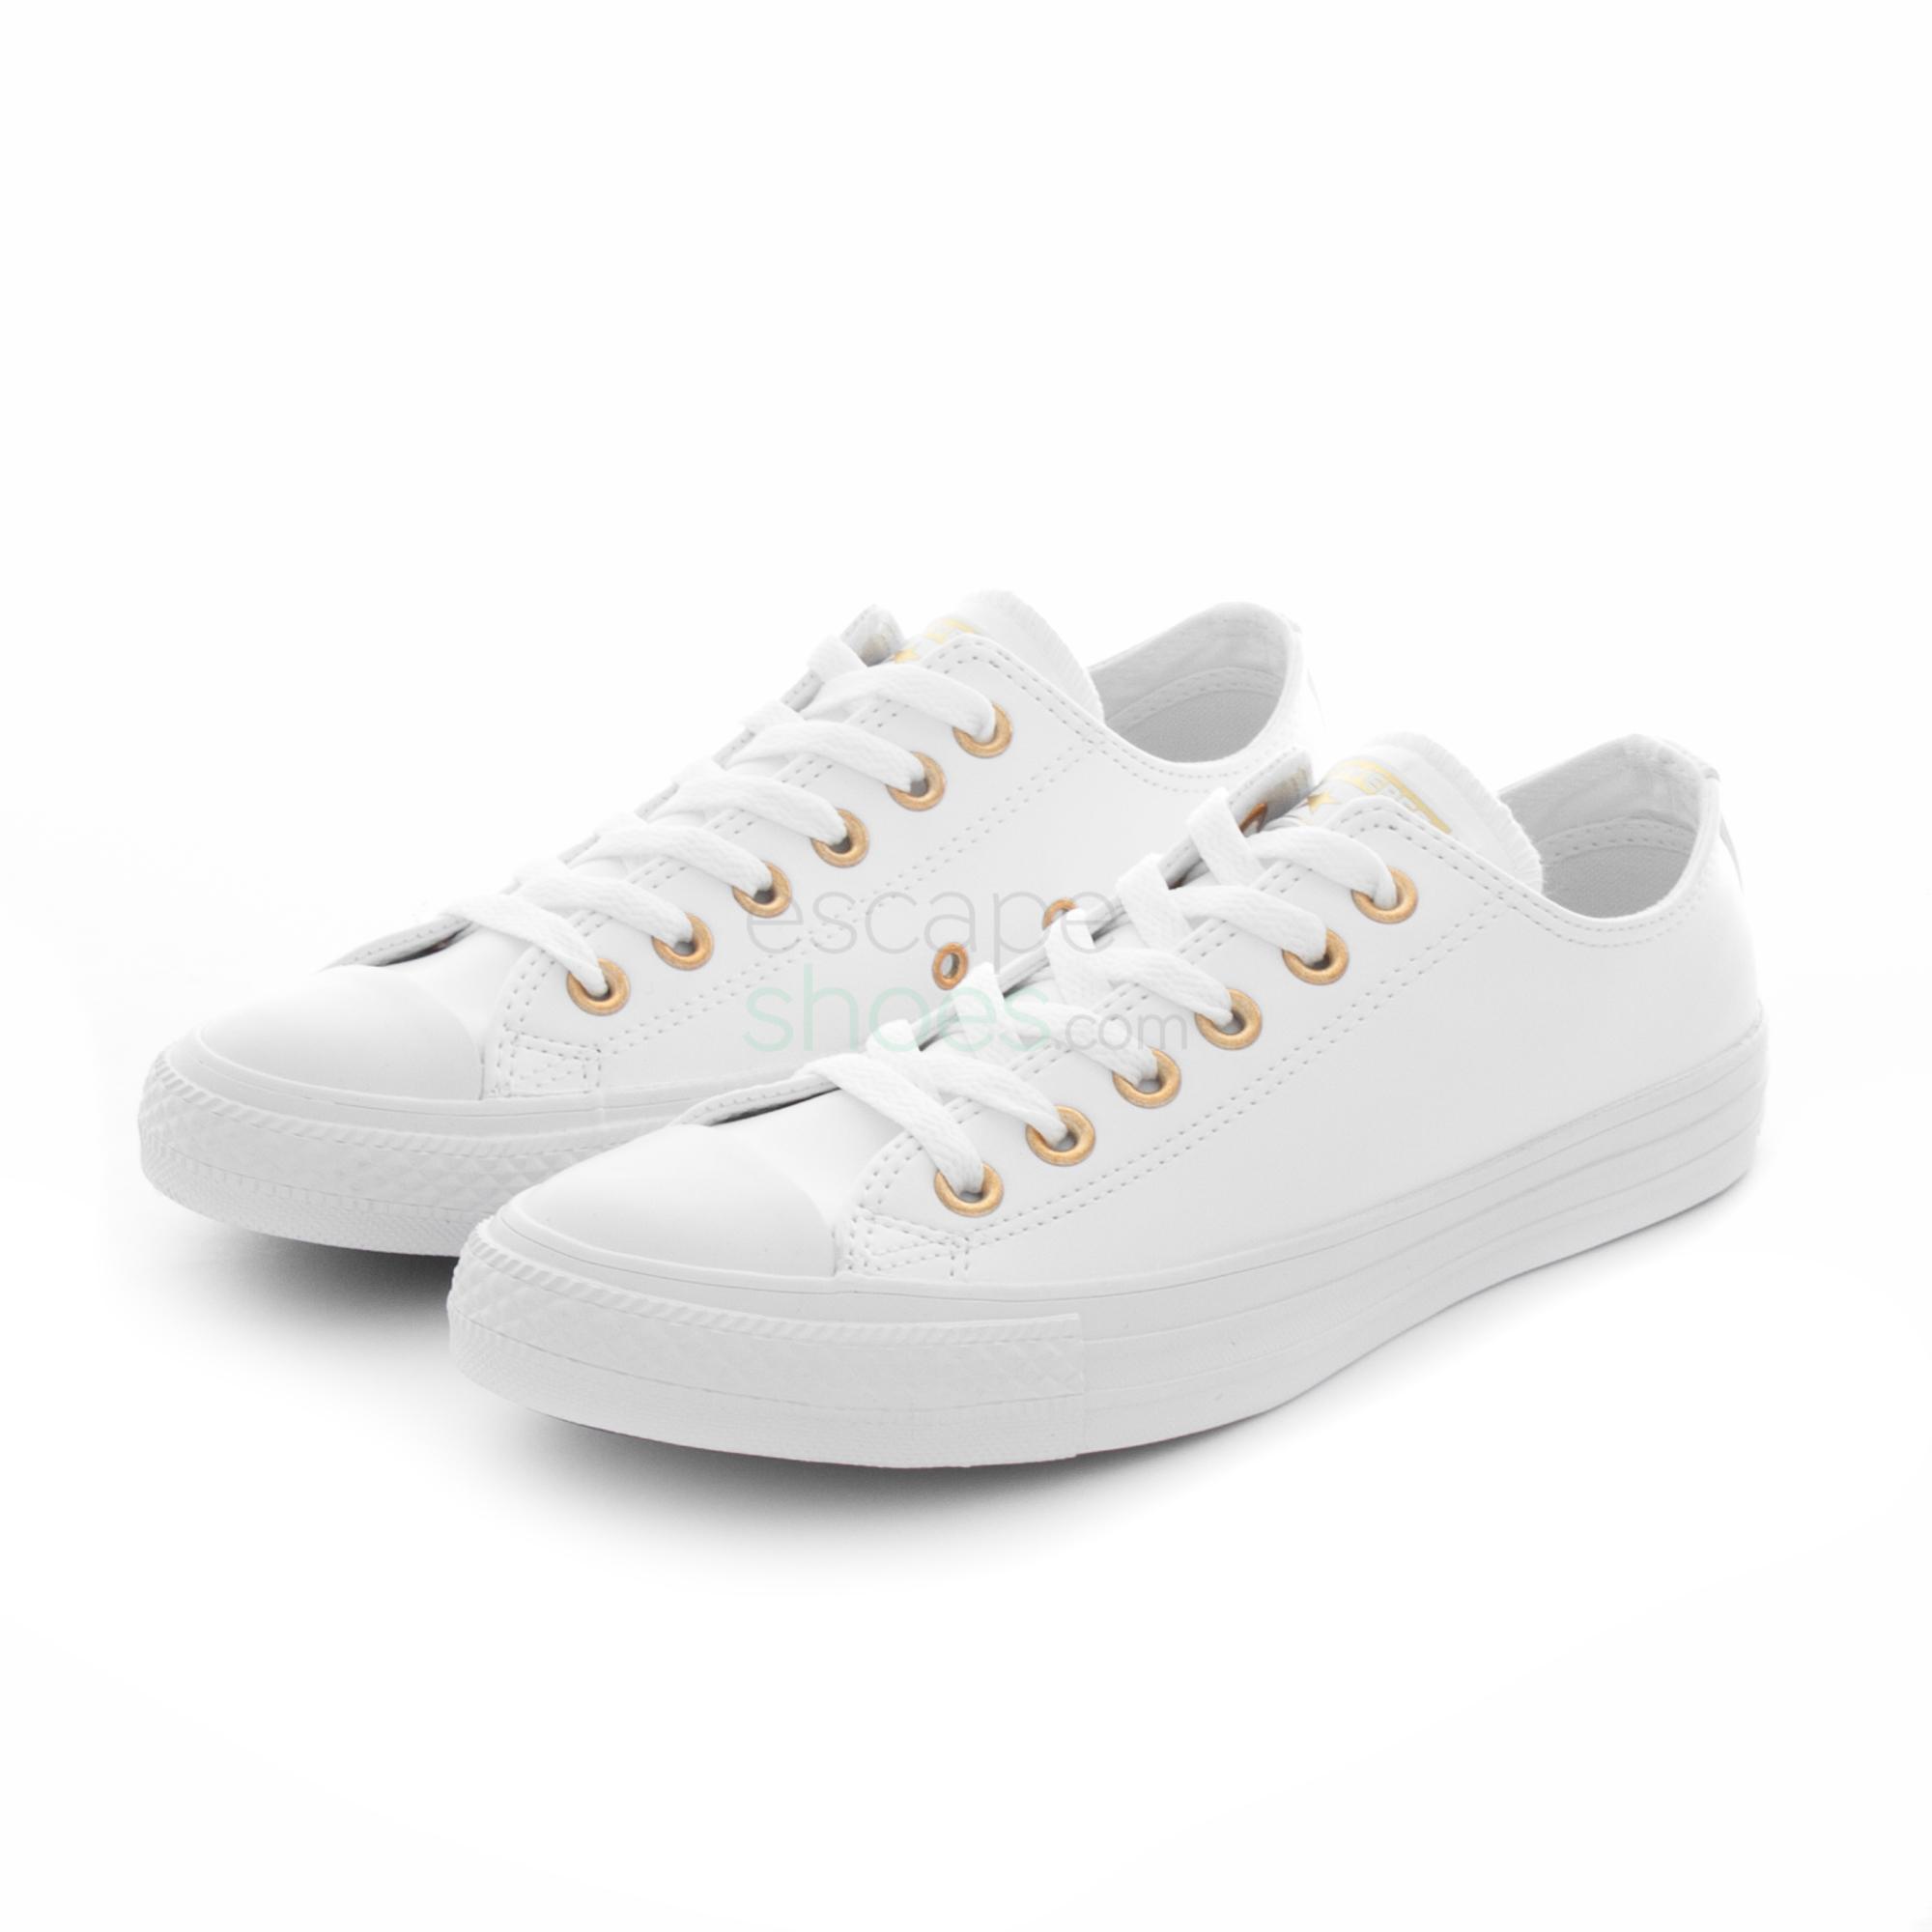 converse all star white gold